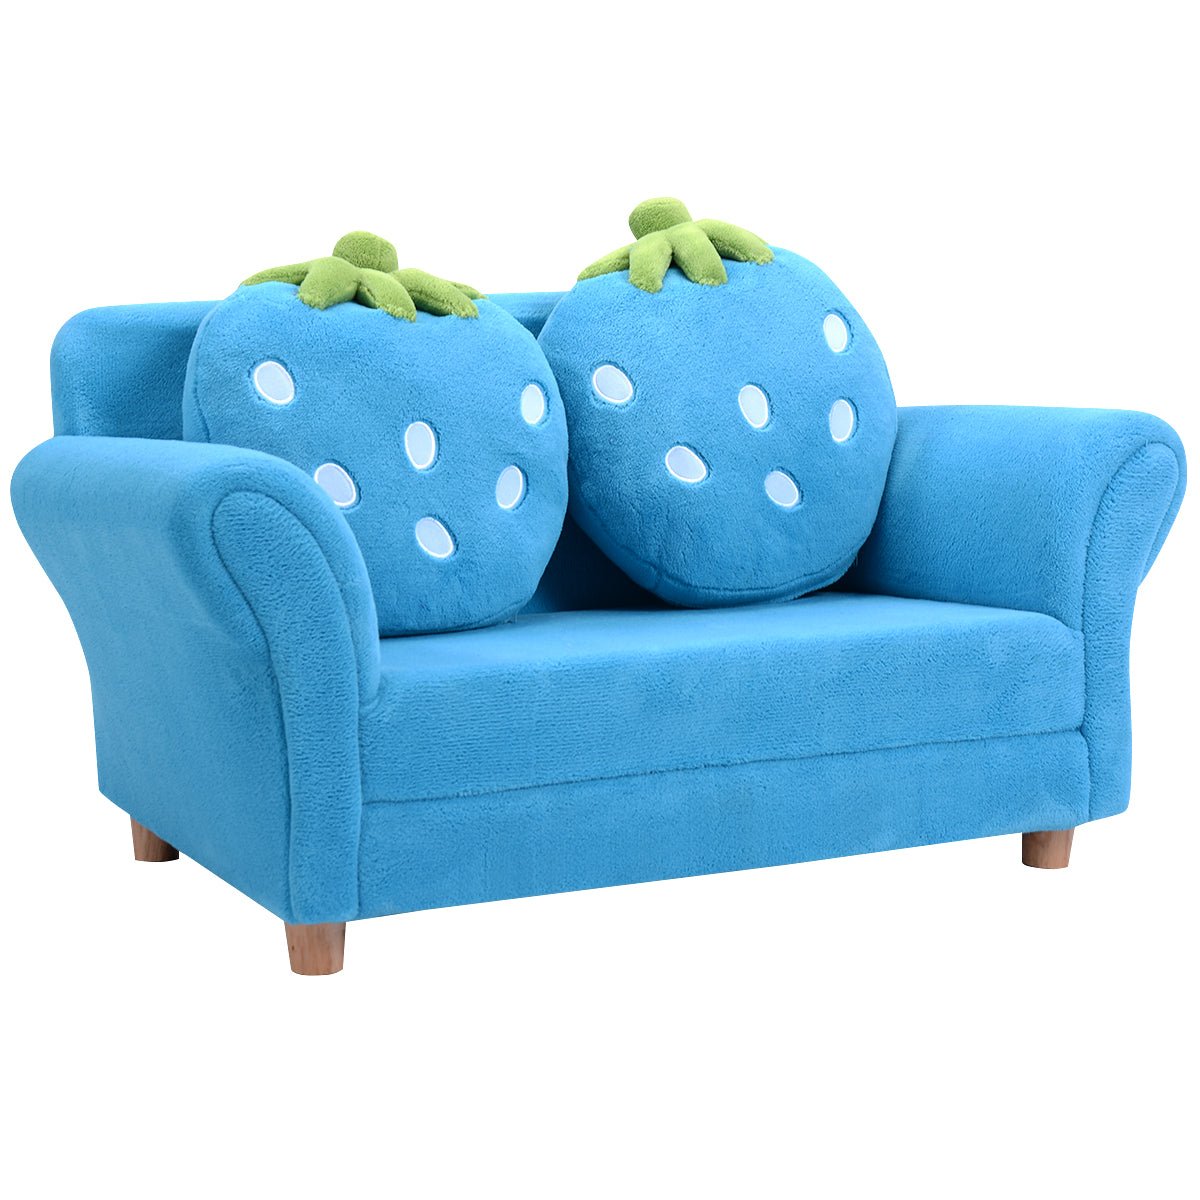 Kids Lounge Bed: 2-Seat Sofa with Strawberry Pillows for Cozy Moments